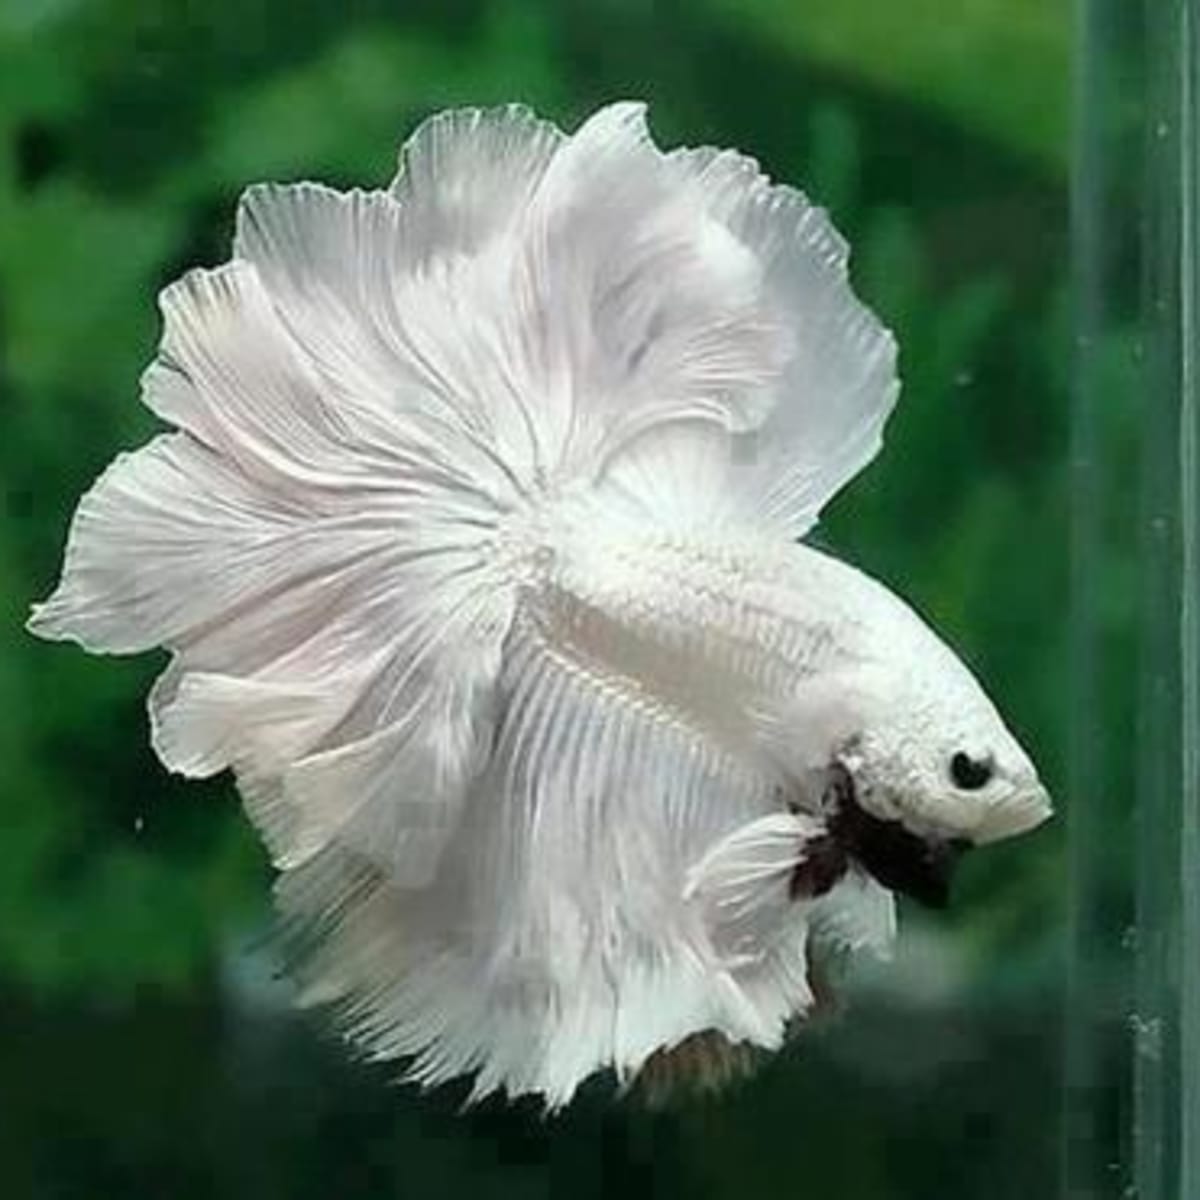 Betta Fish Tank Setup Ideas And Advice Pethelpful By Fellow Animal Lovers And Experts